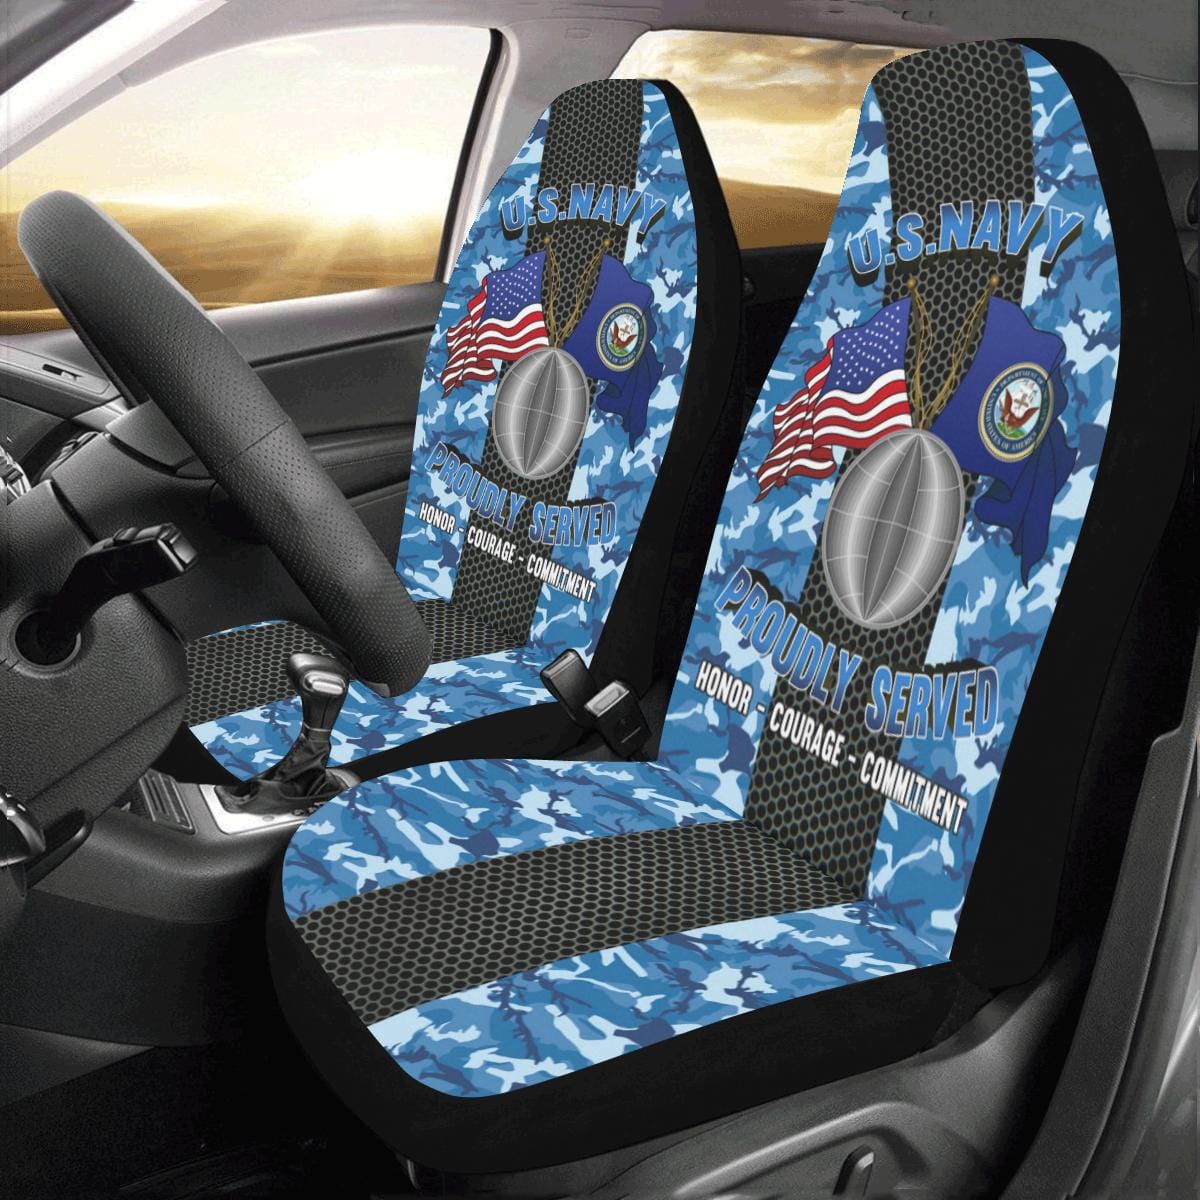 U.S Navy Electrician's mate Navy EM Car Seat Covers (Set of 2)-SeatCovers-Navy-Rate-Veterans Nation